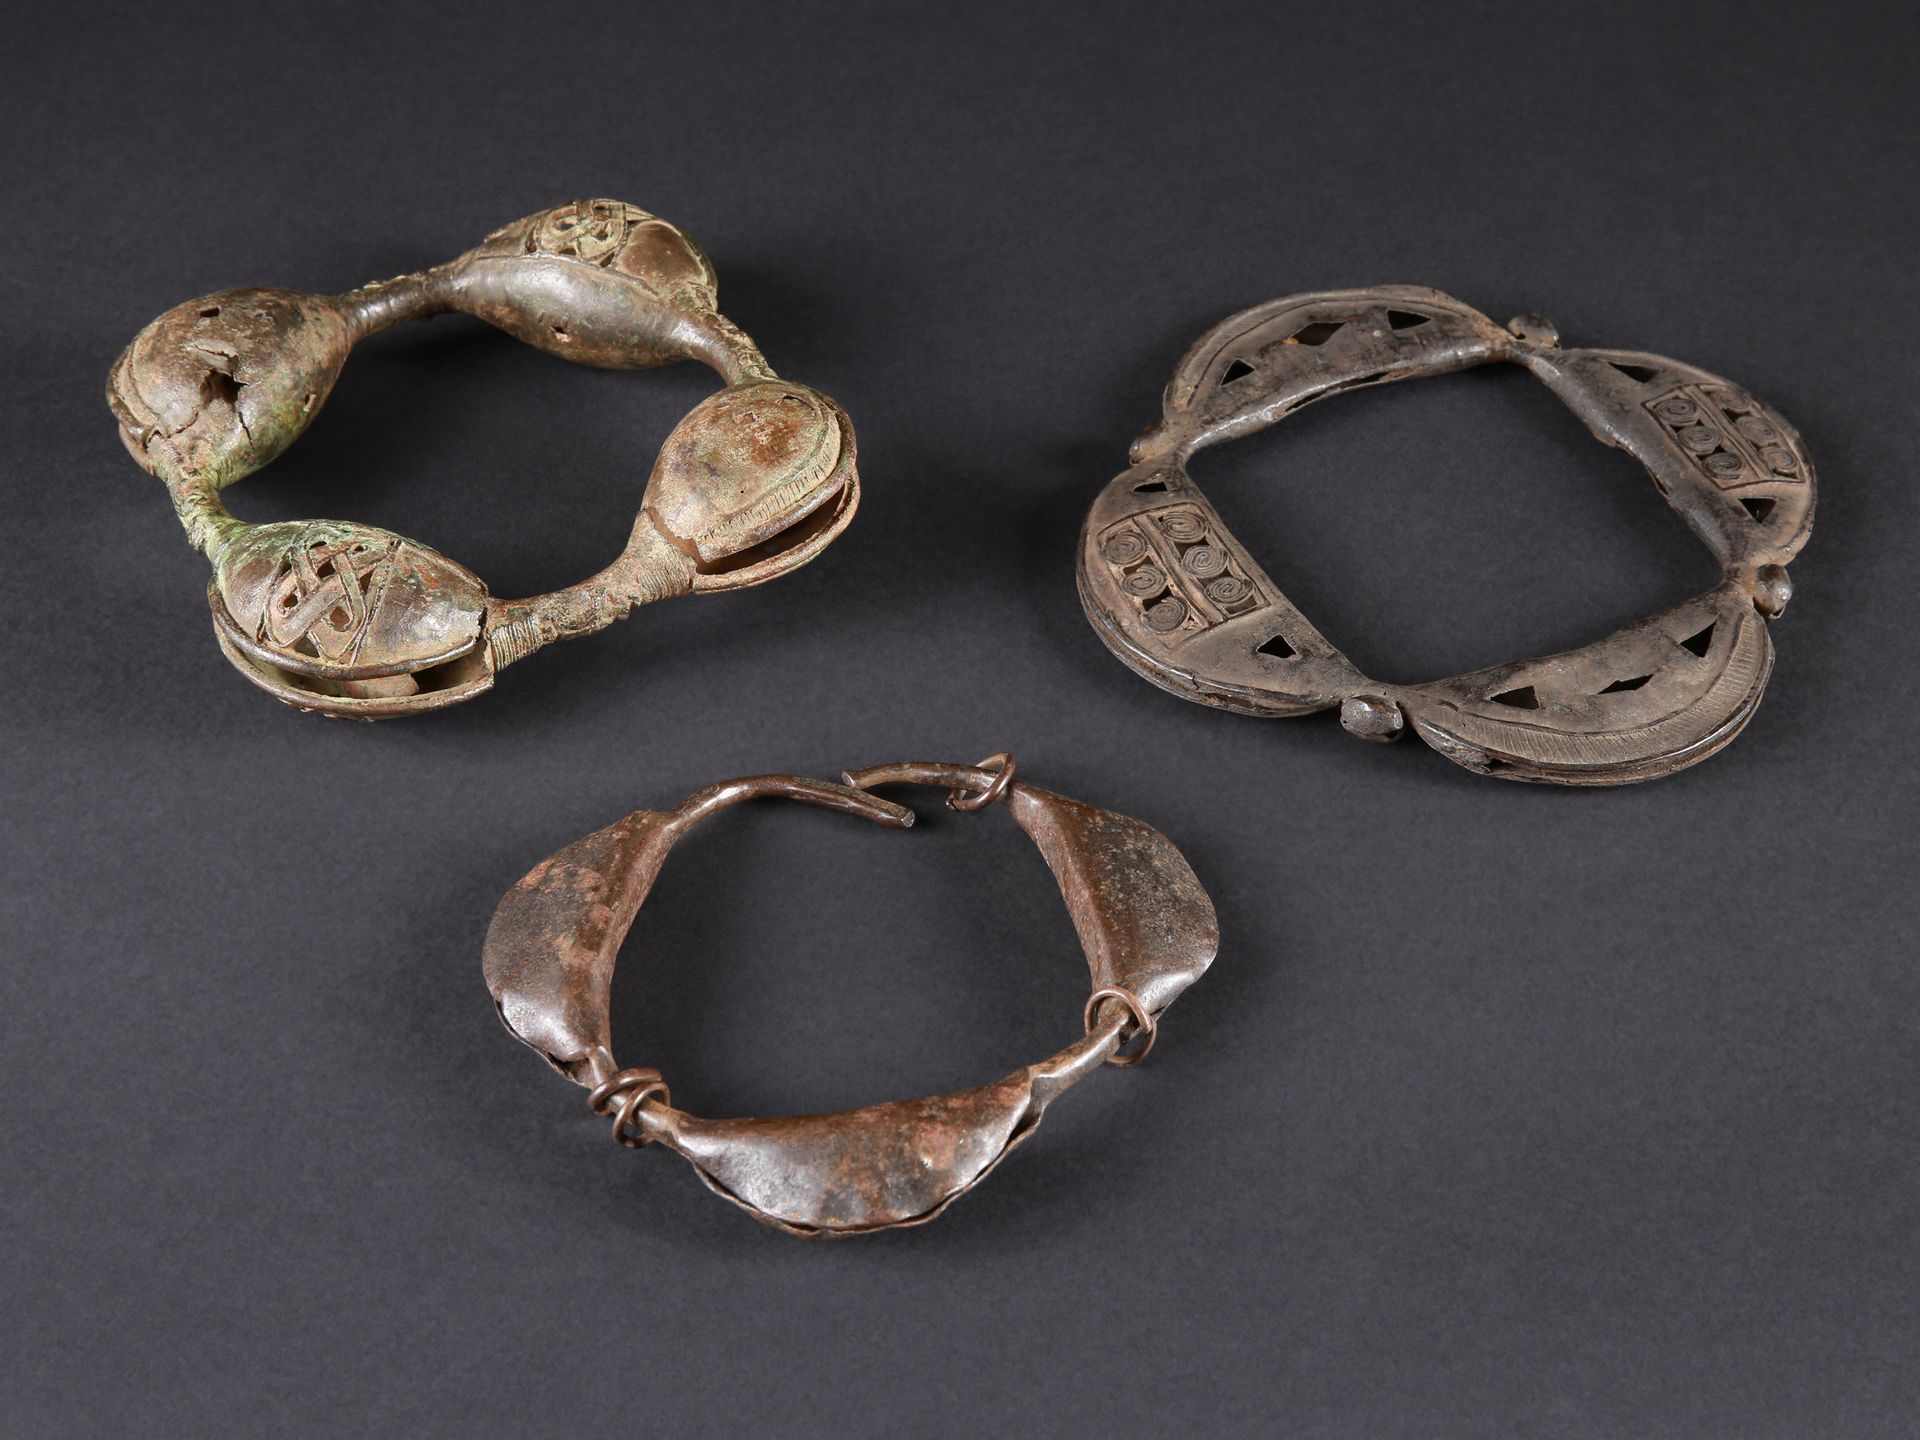 2 Yoruba Anklets and a Chamba Anklet (Rattles) 3 hochets à pied
Yoruba/CHamba, N&hellip;